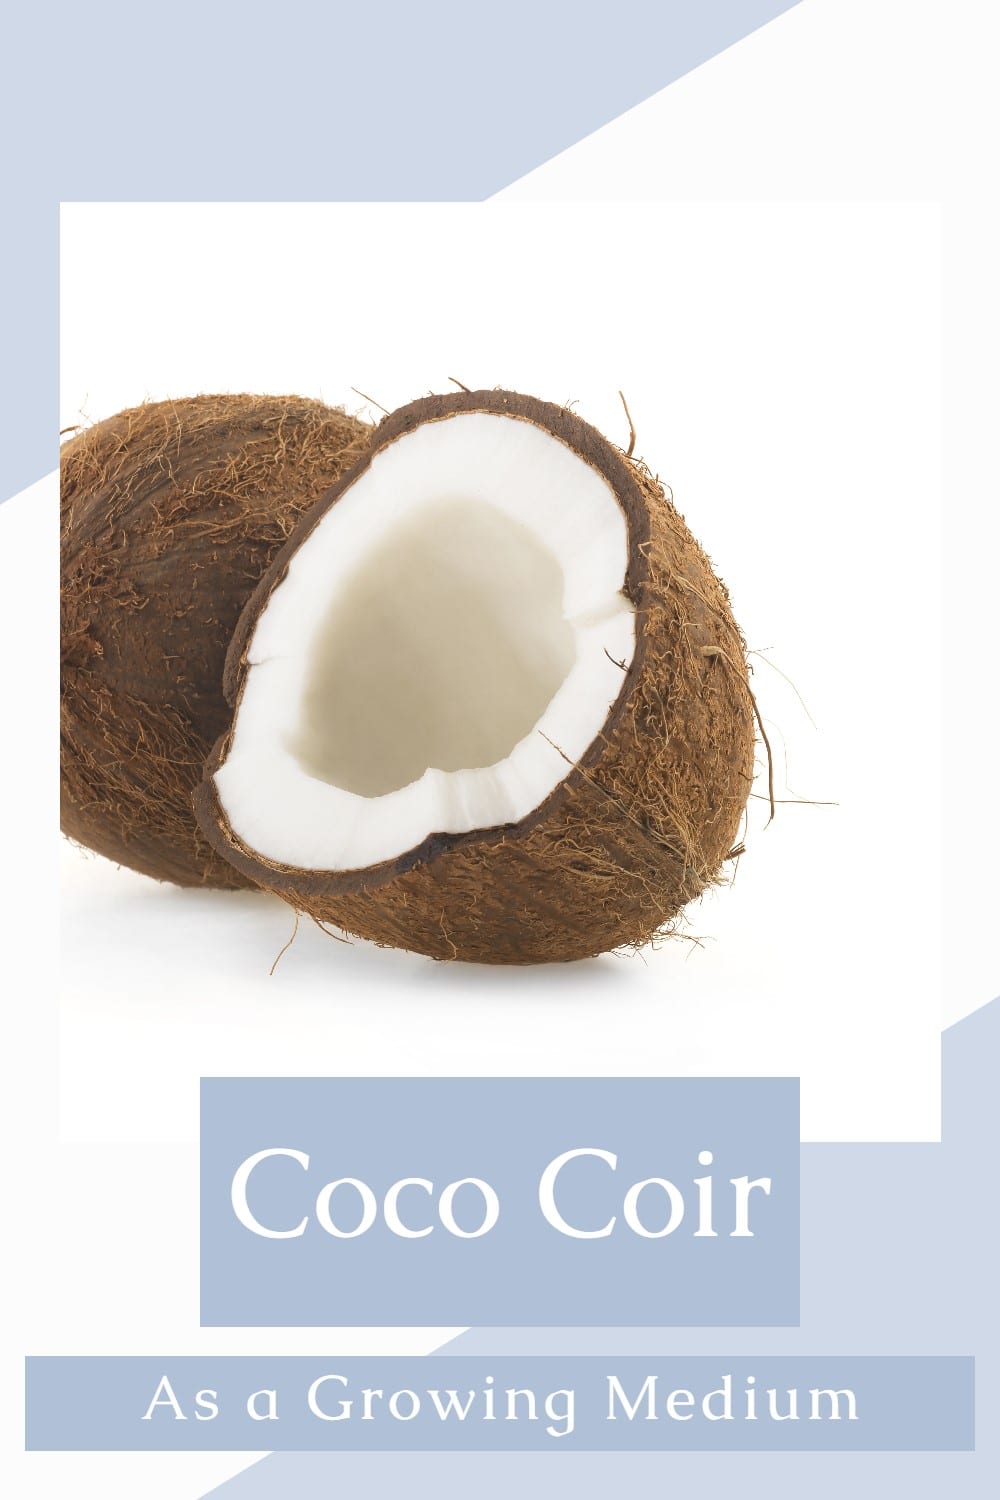 What is Coco Coir and how do you use it? It is basically the wasted part of a coconut, the husk. It can be used as a planting medium. via @repurposedlife